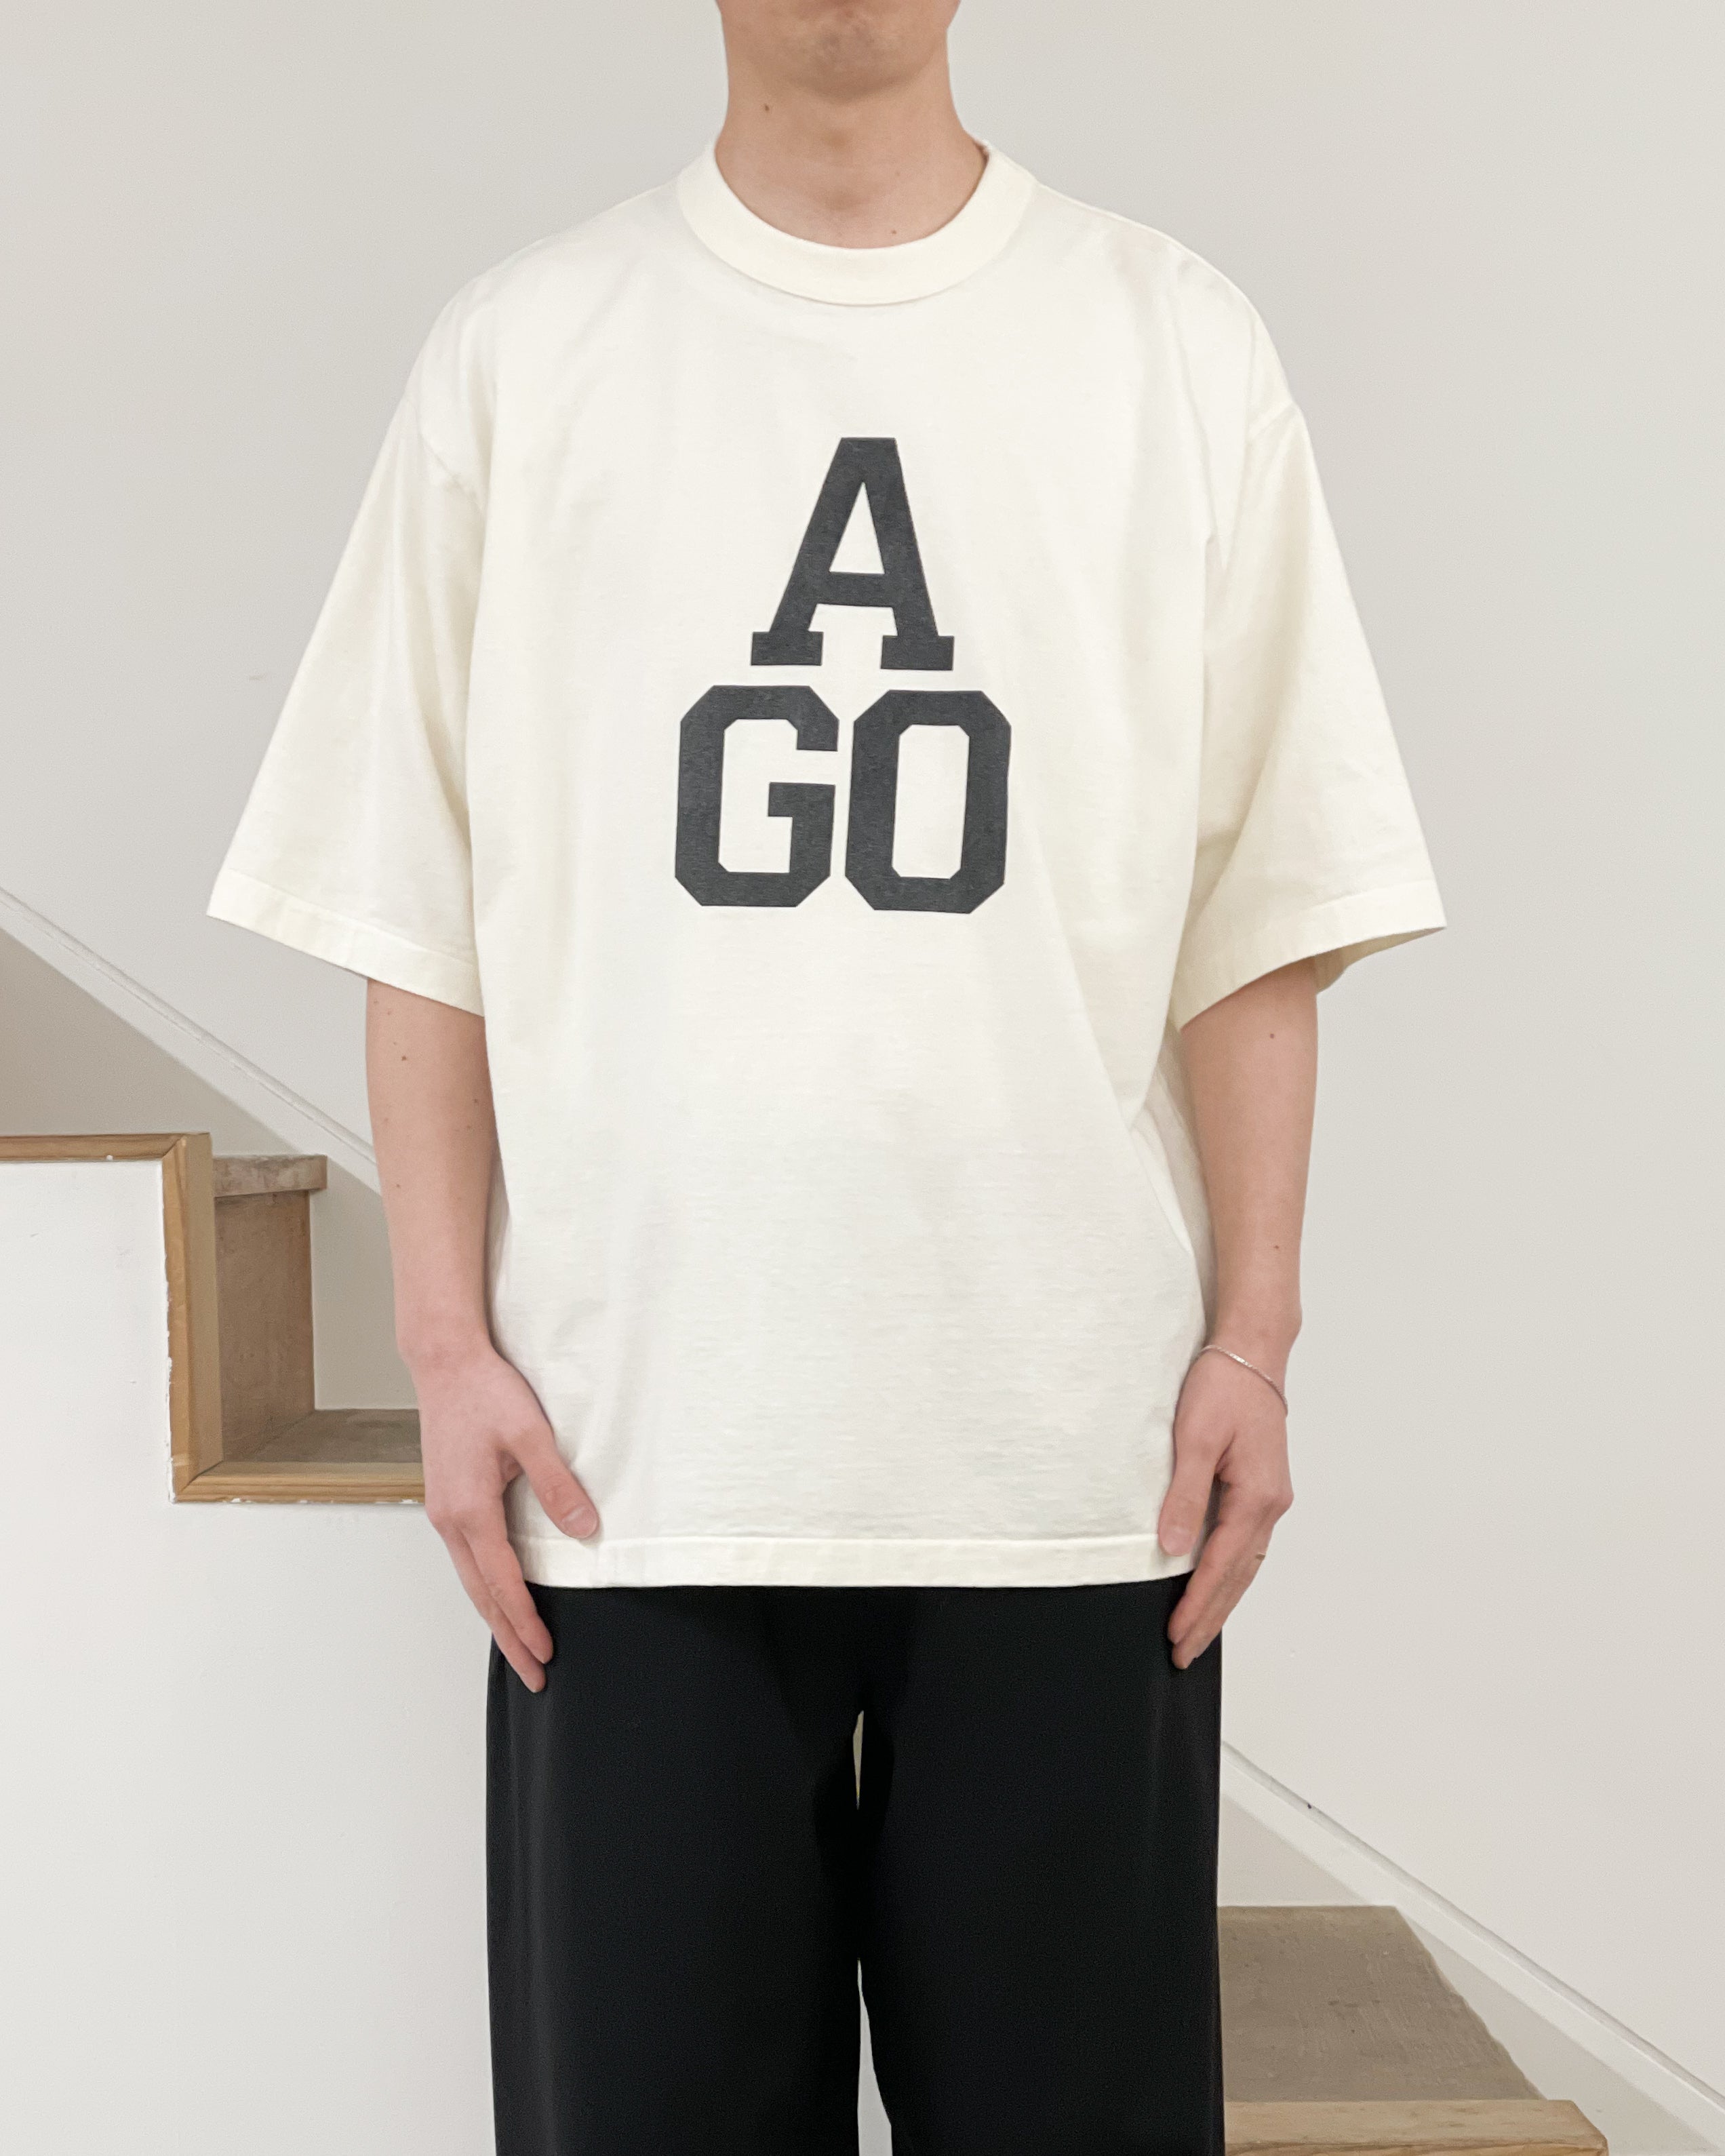 [blurhms ROOTSTOCK] CHIC-AGO 88/12 PRINT TEE WIDE - IVORY